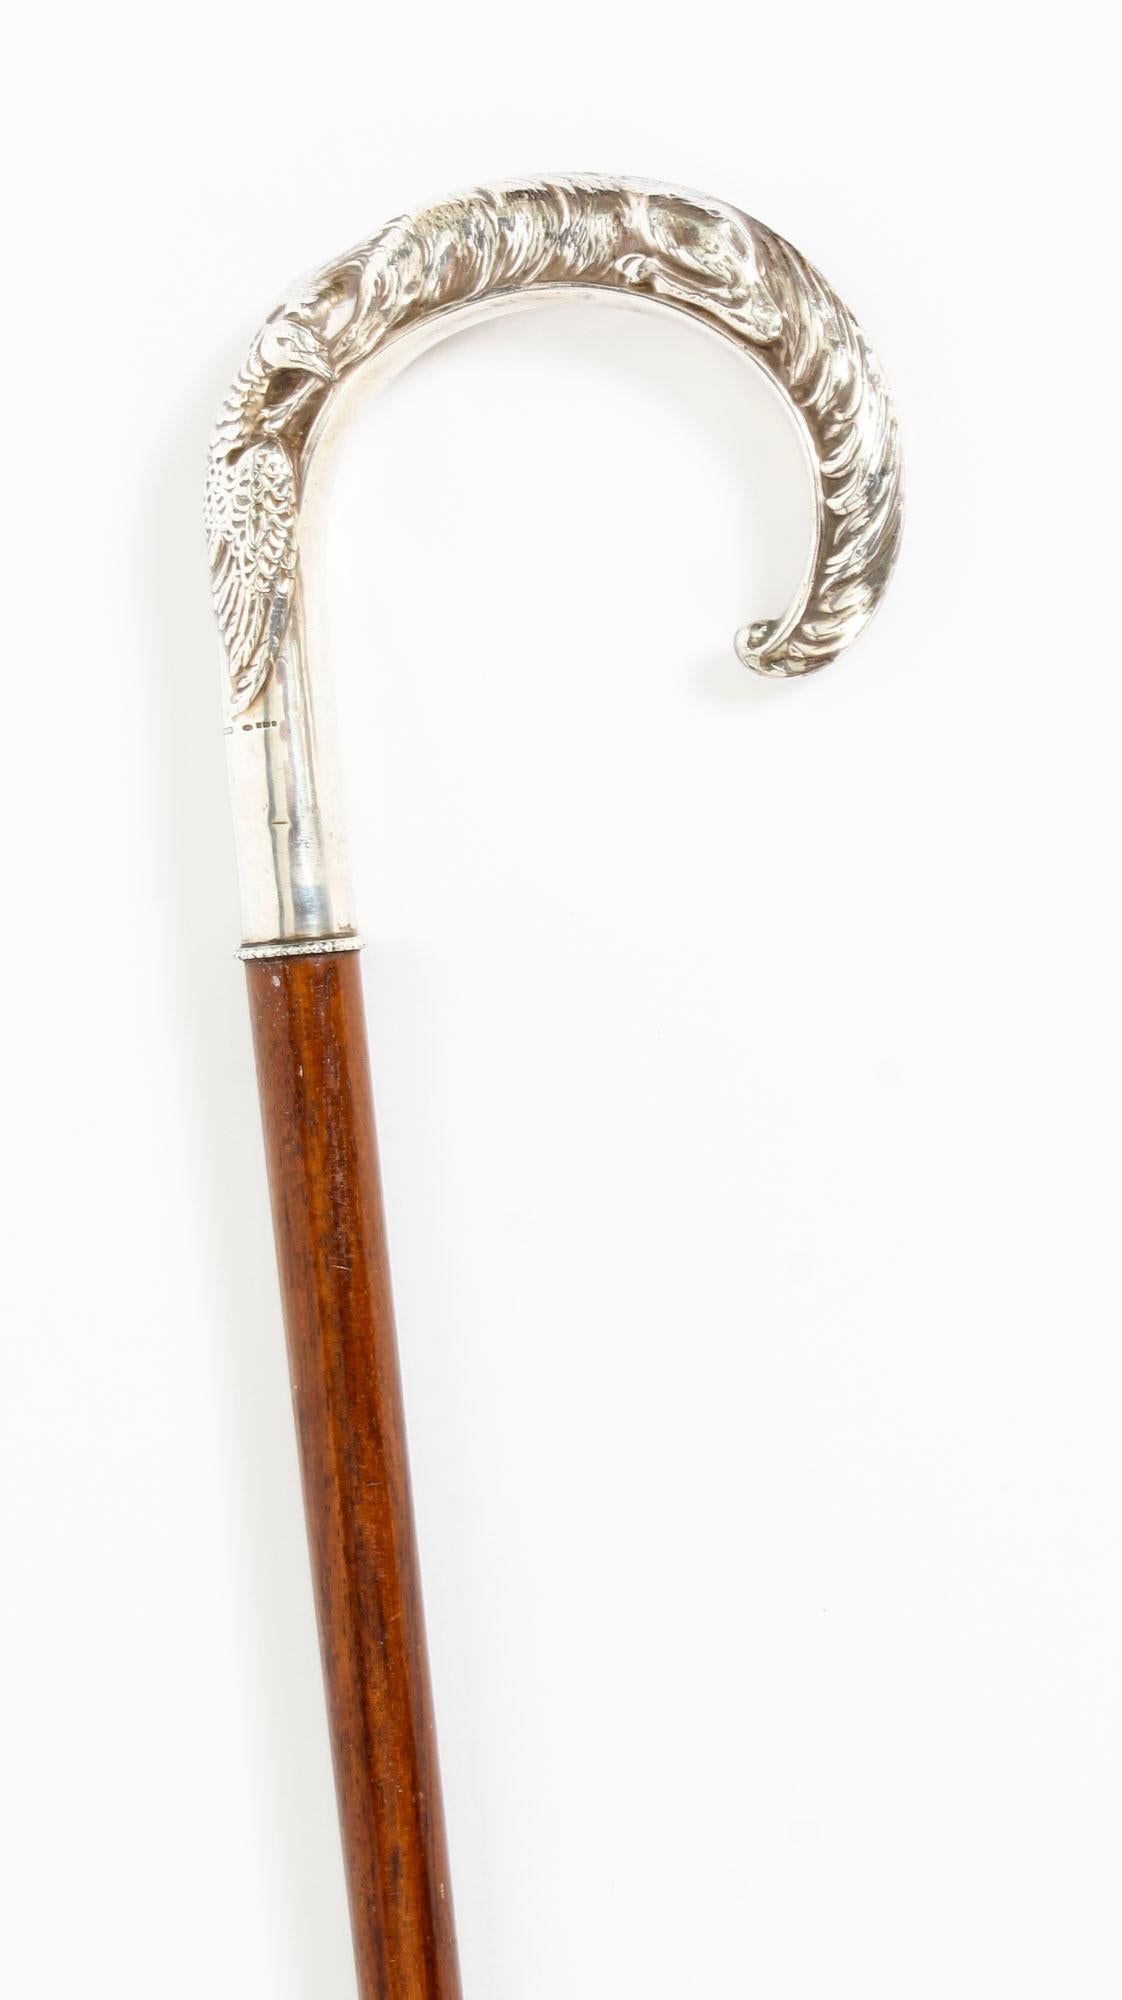 This is a fantastic antique French gentleman's walking stick with a sterling silver crook handle and bearing London import marks, circa 1880 in date.

It has a very decorative sterling silver curved crook handle in the form of a finely cast fox